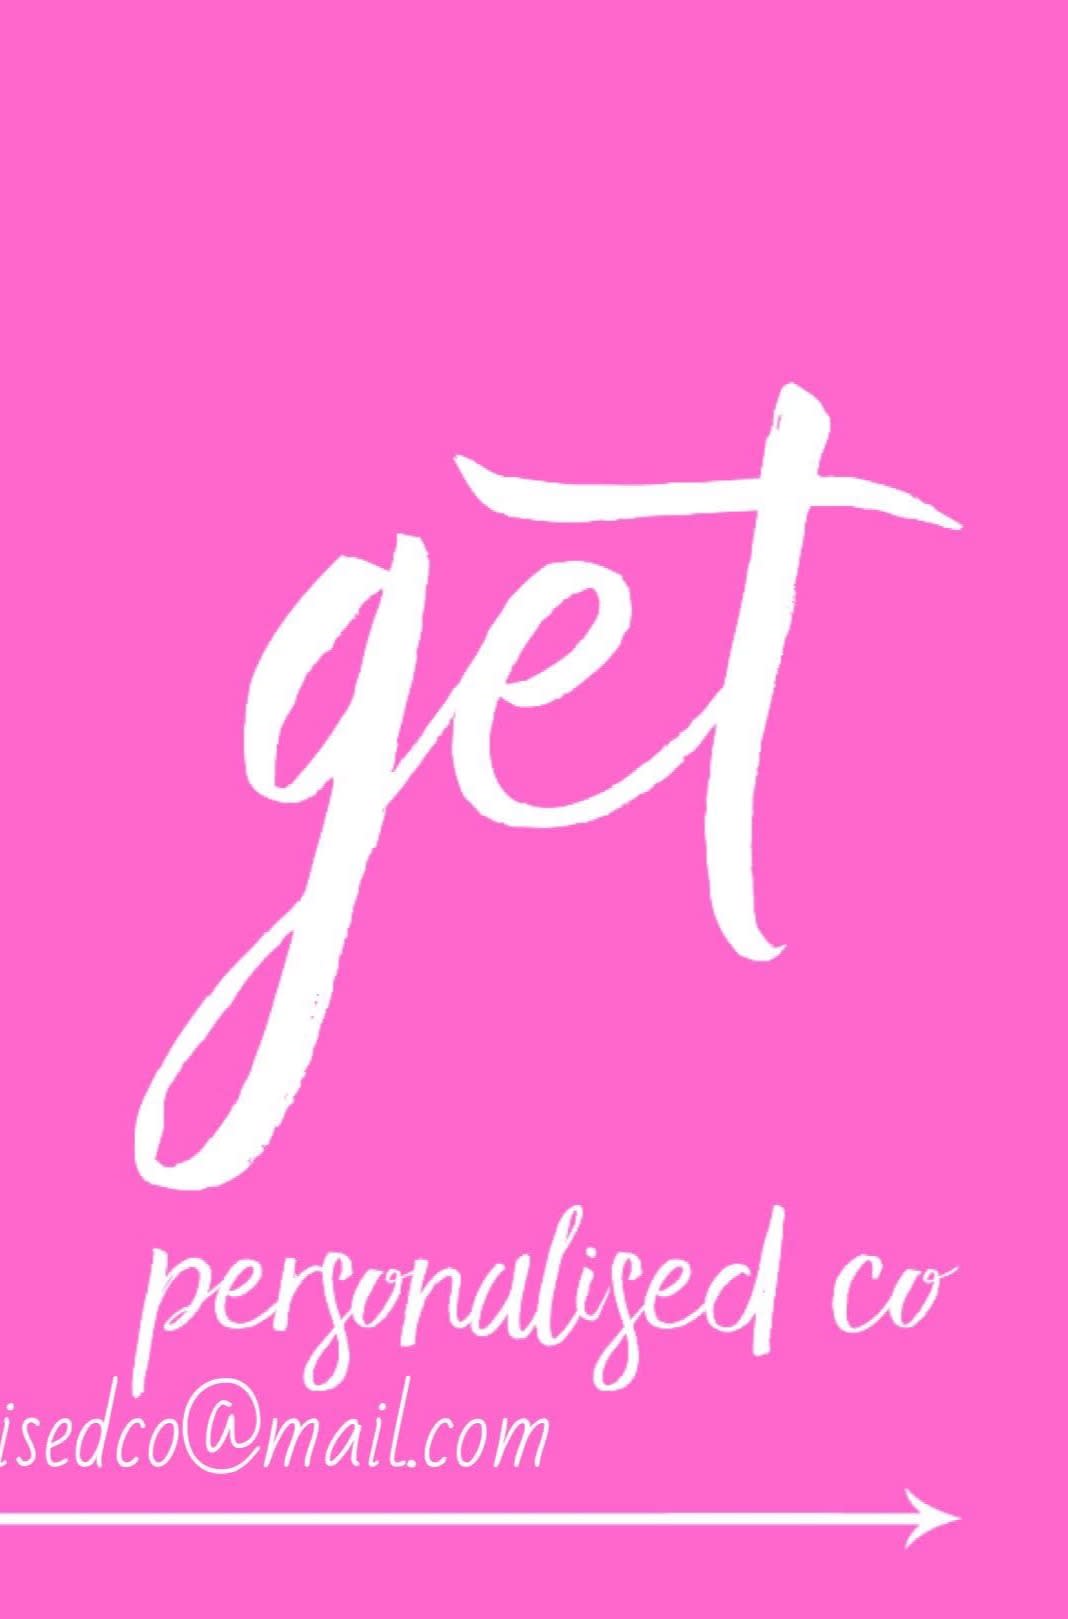 Get Personalised Co